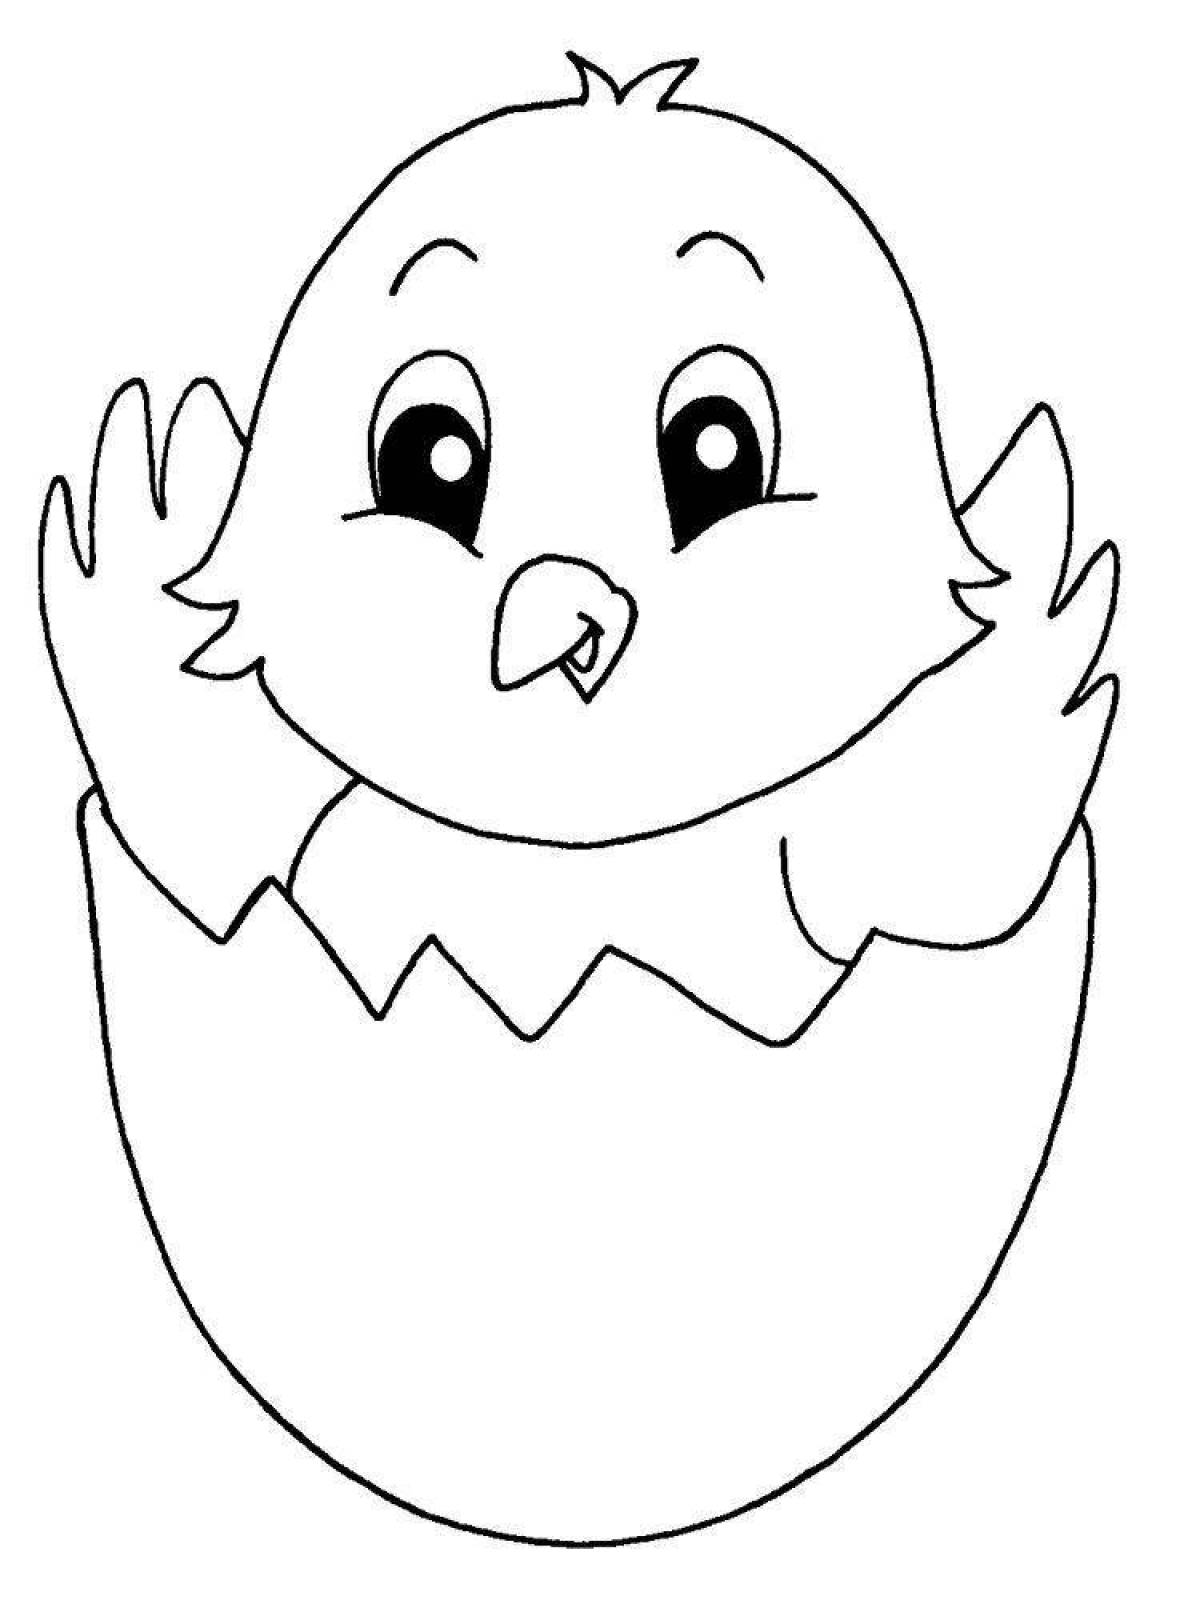 Adorable chick coloring book for 3-4 year olds